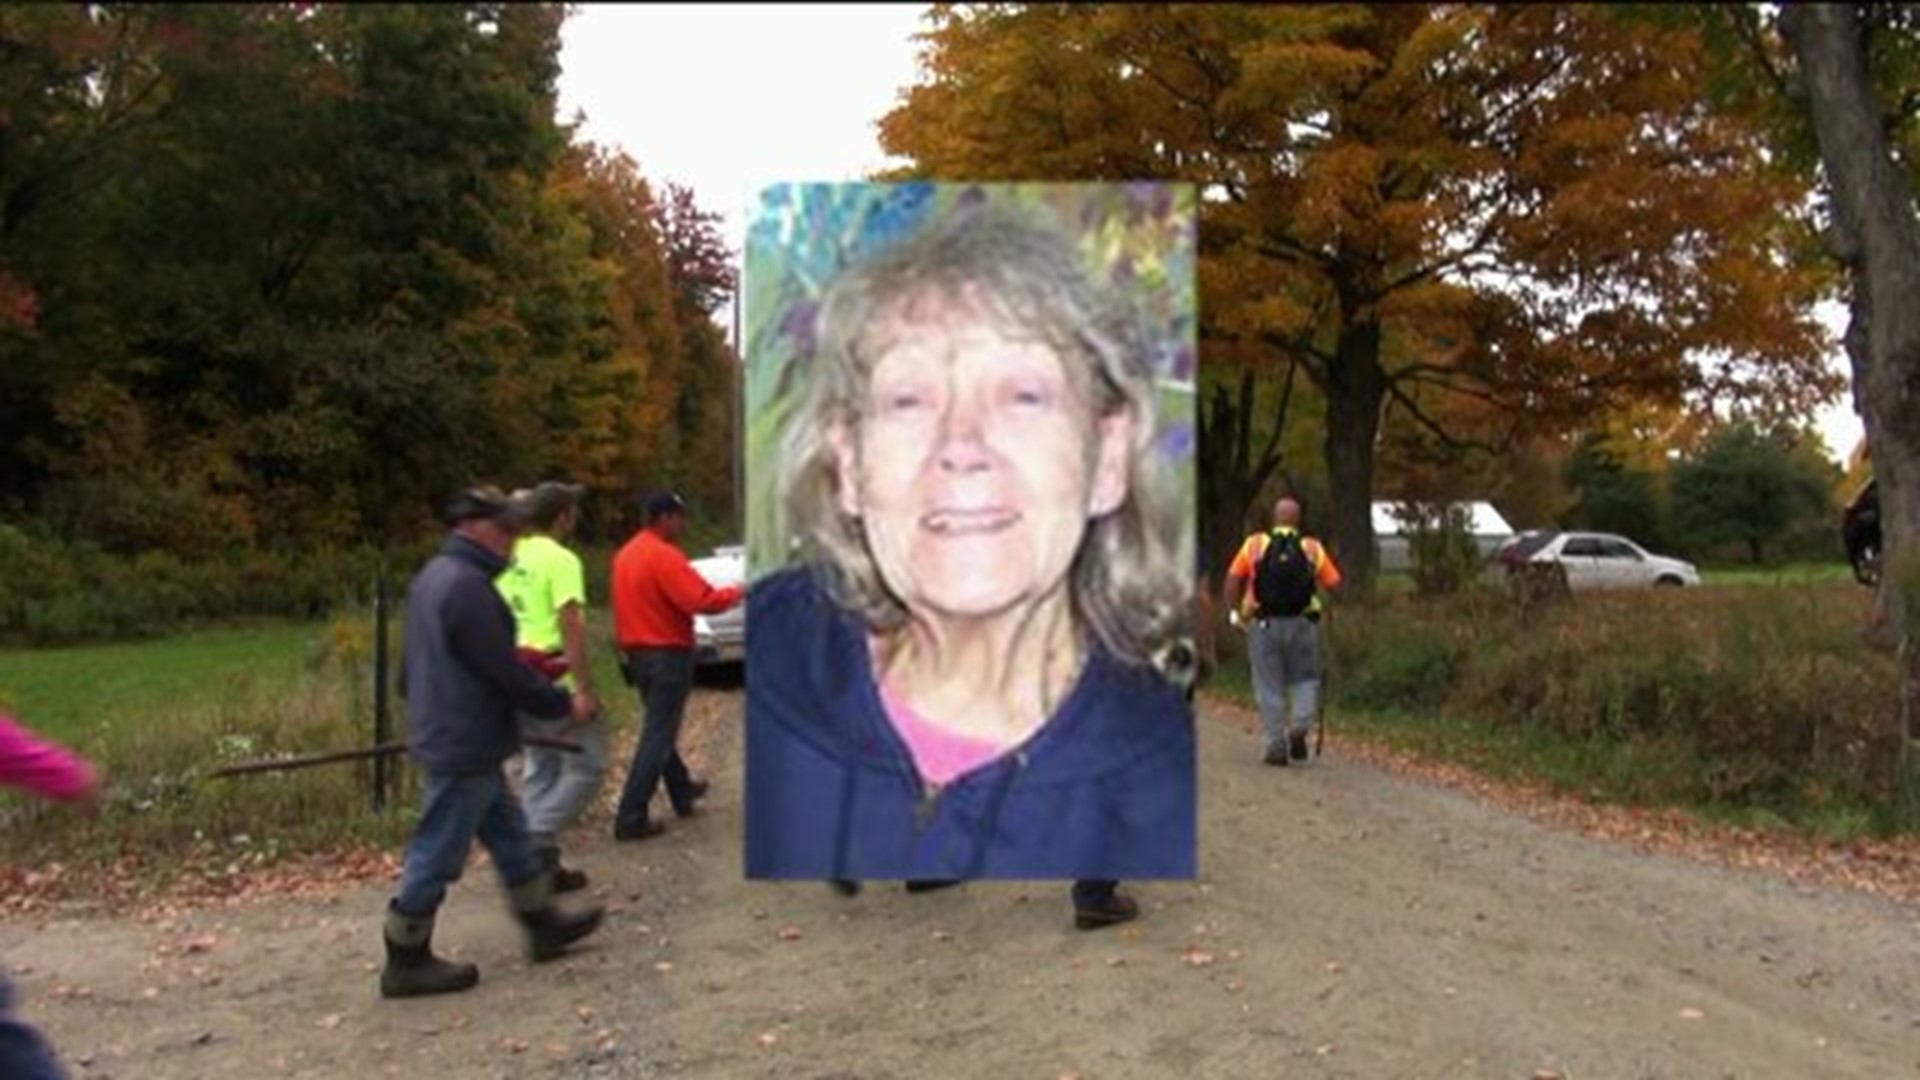 Search Continues for Elderly Woman in Susquehanna County